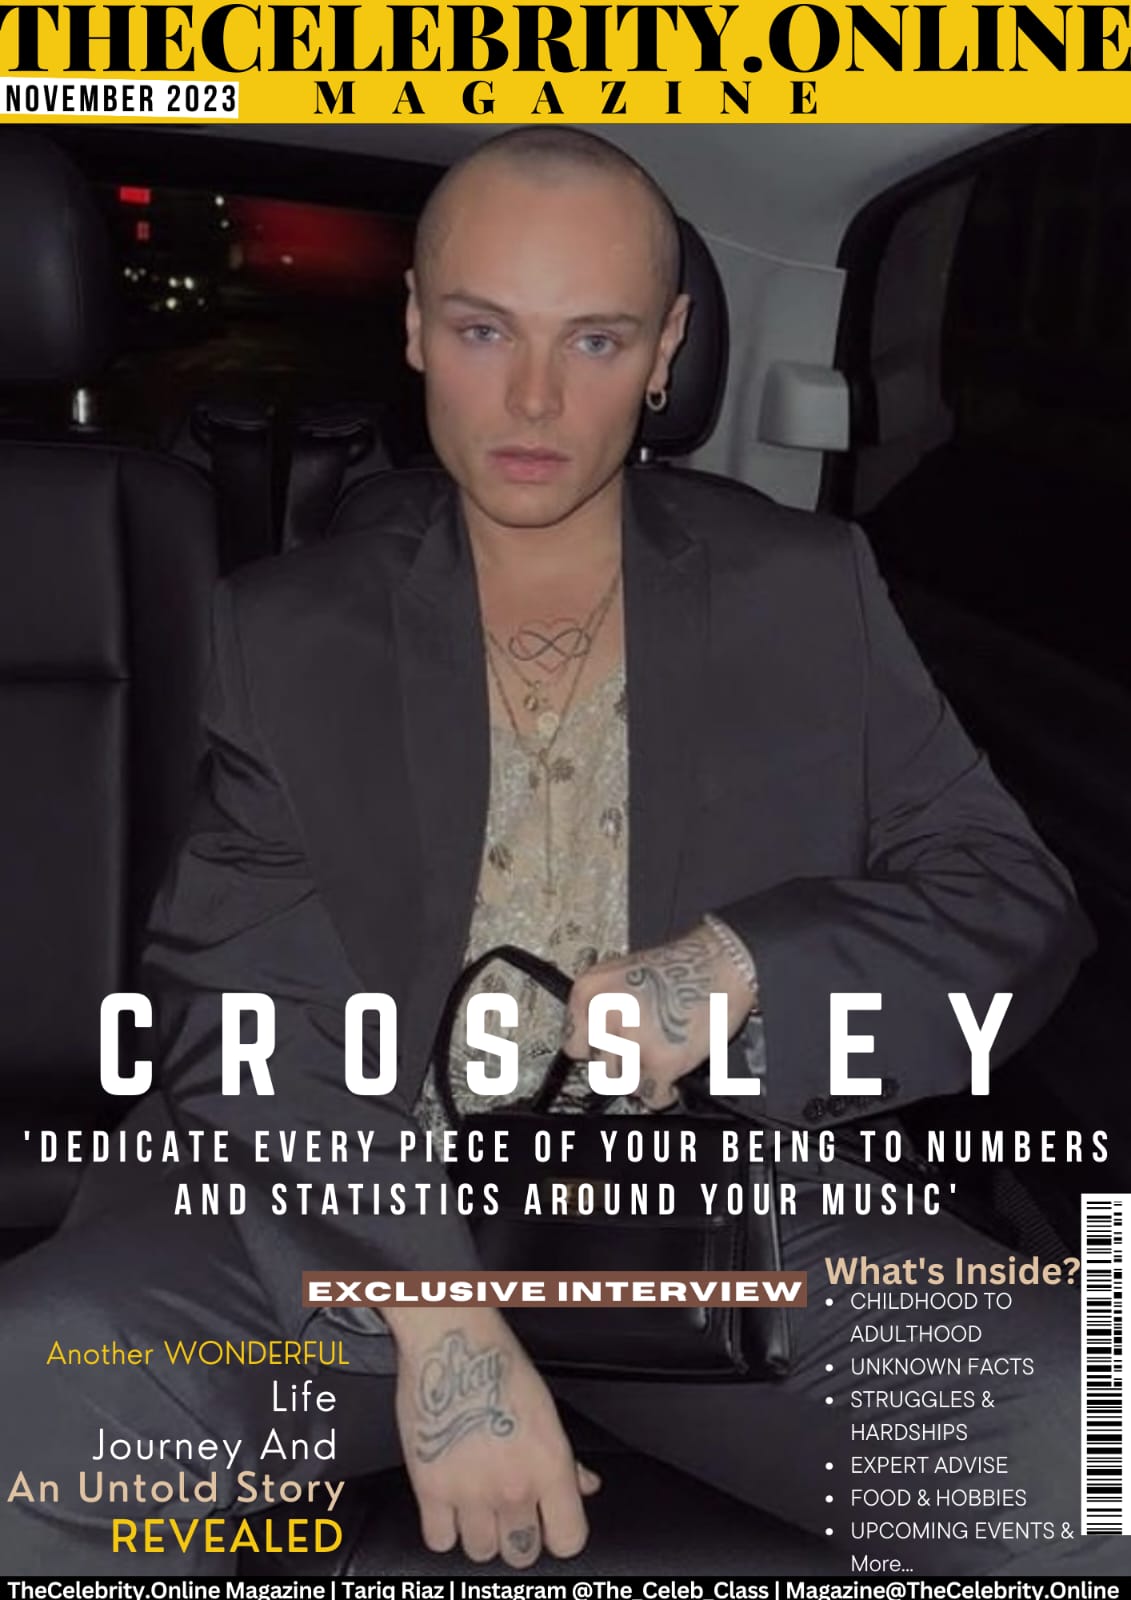 CROSSLEY’s Exclusive Interview – ‘Dedicate Every Piece Of Your Being To Numbers And Statistics Around Your Music’